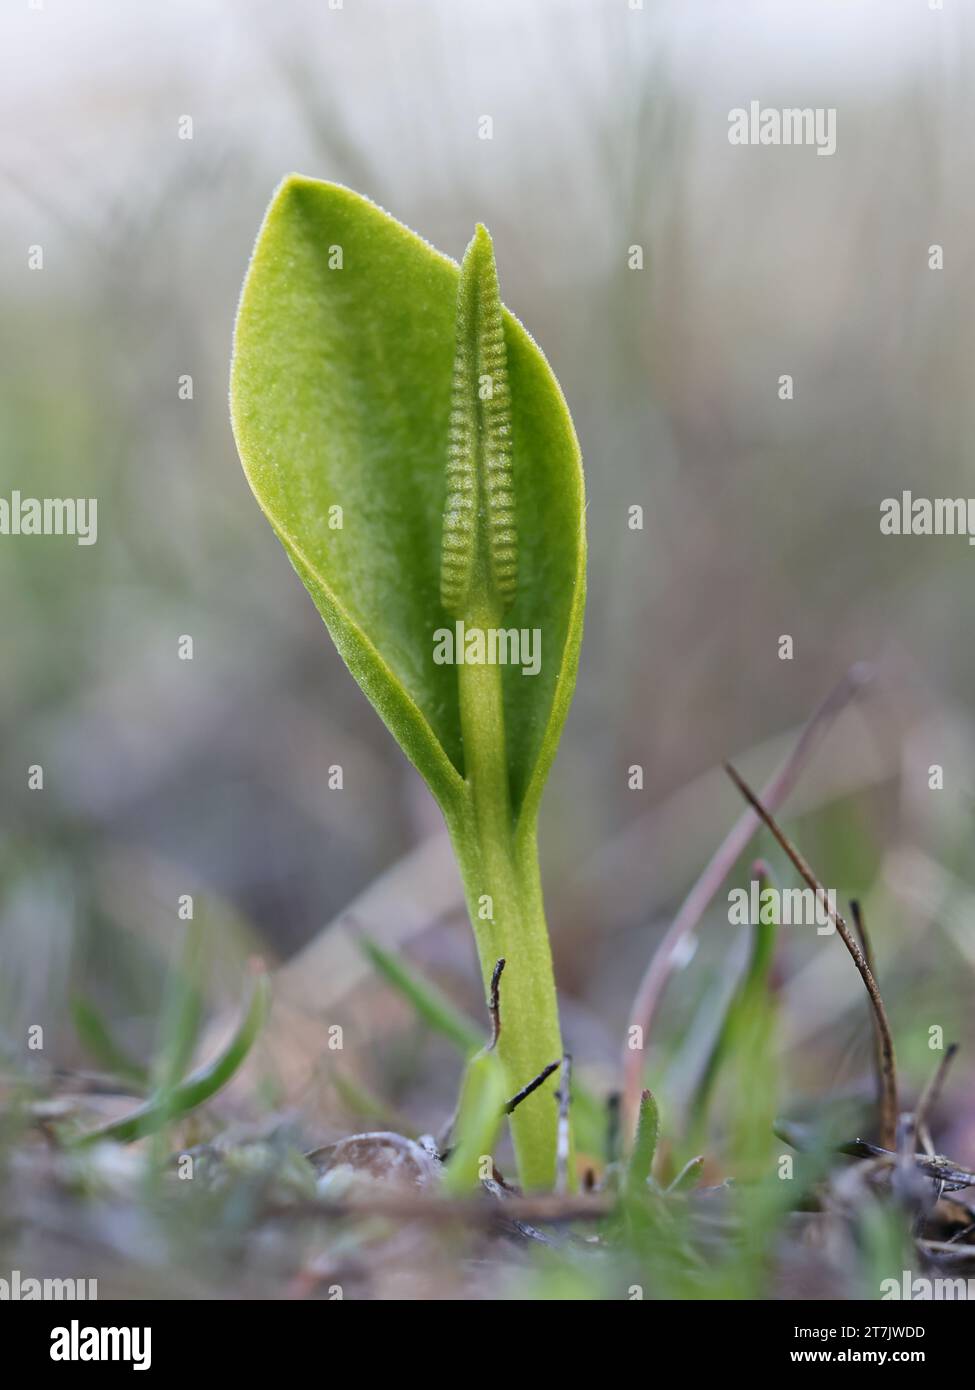 Ophioglossum vulgatum, commonly known as adder's-tongue, southern adders-tongue or adderstongue fern, wild plant from Finland Stock Photo